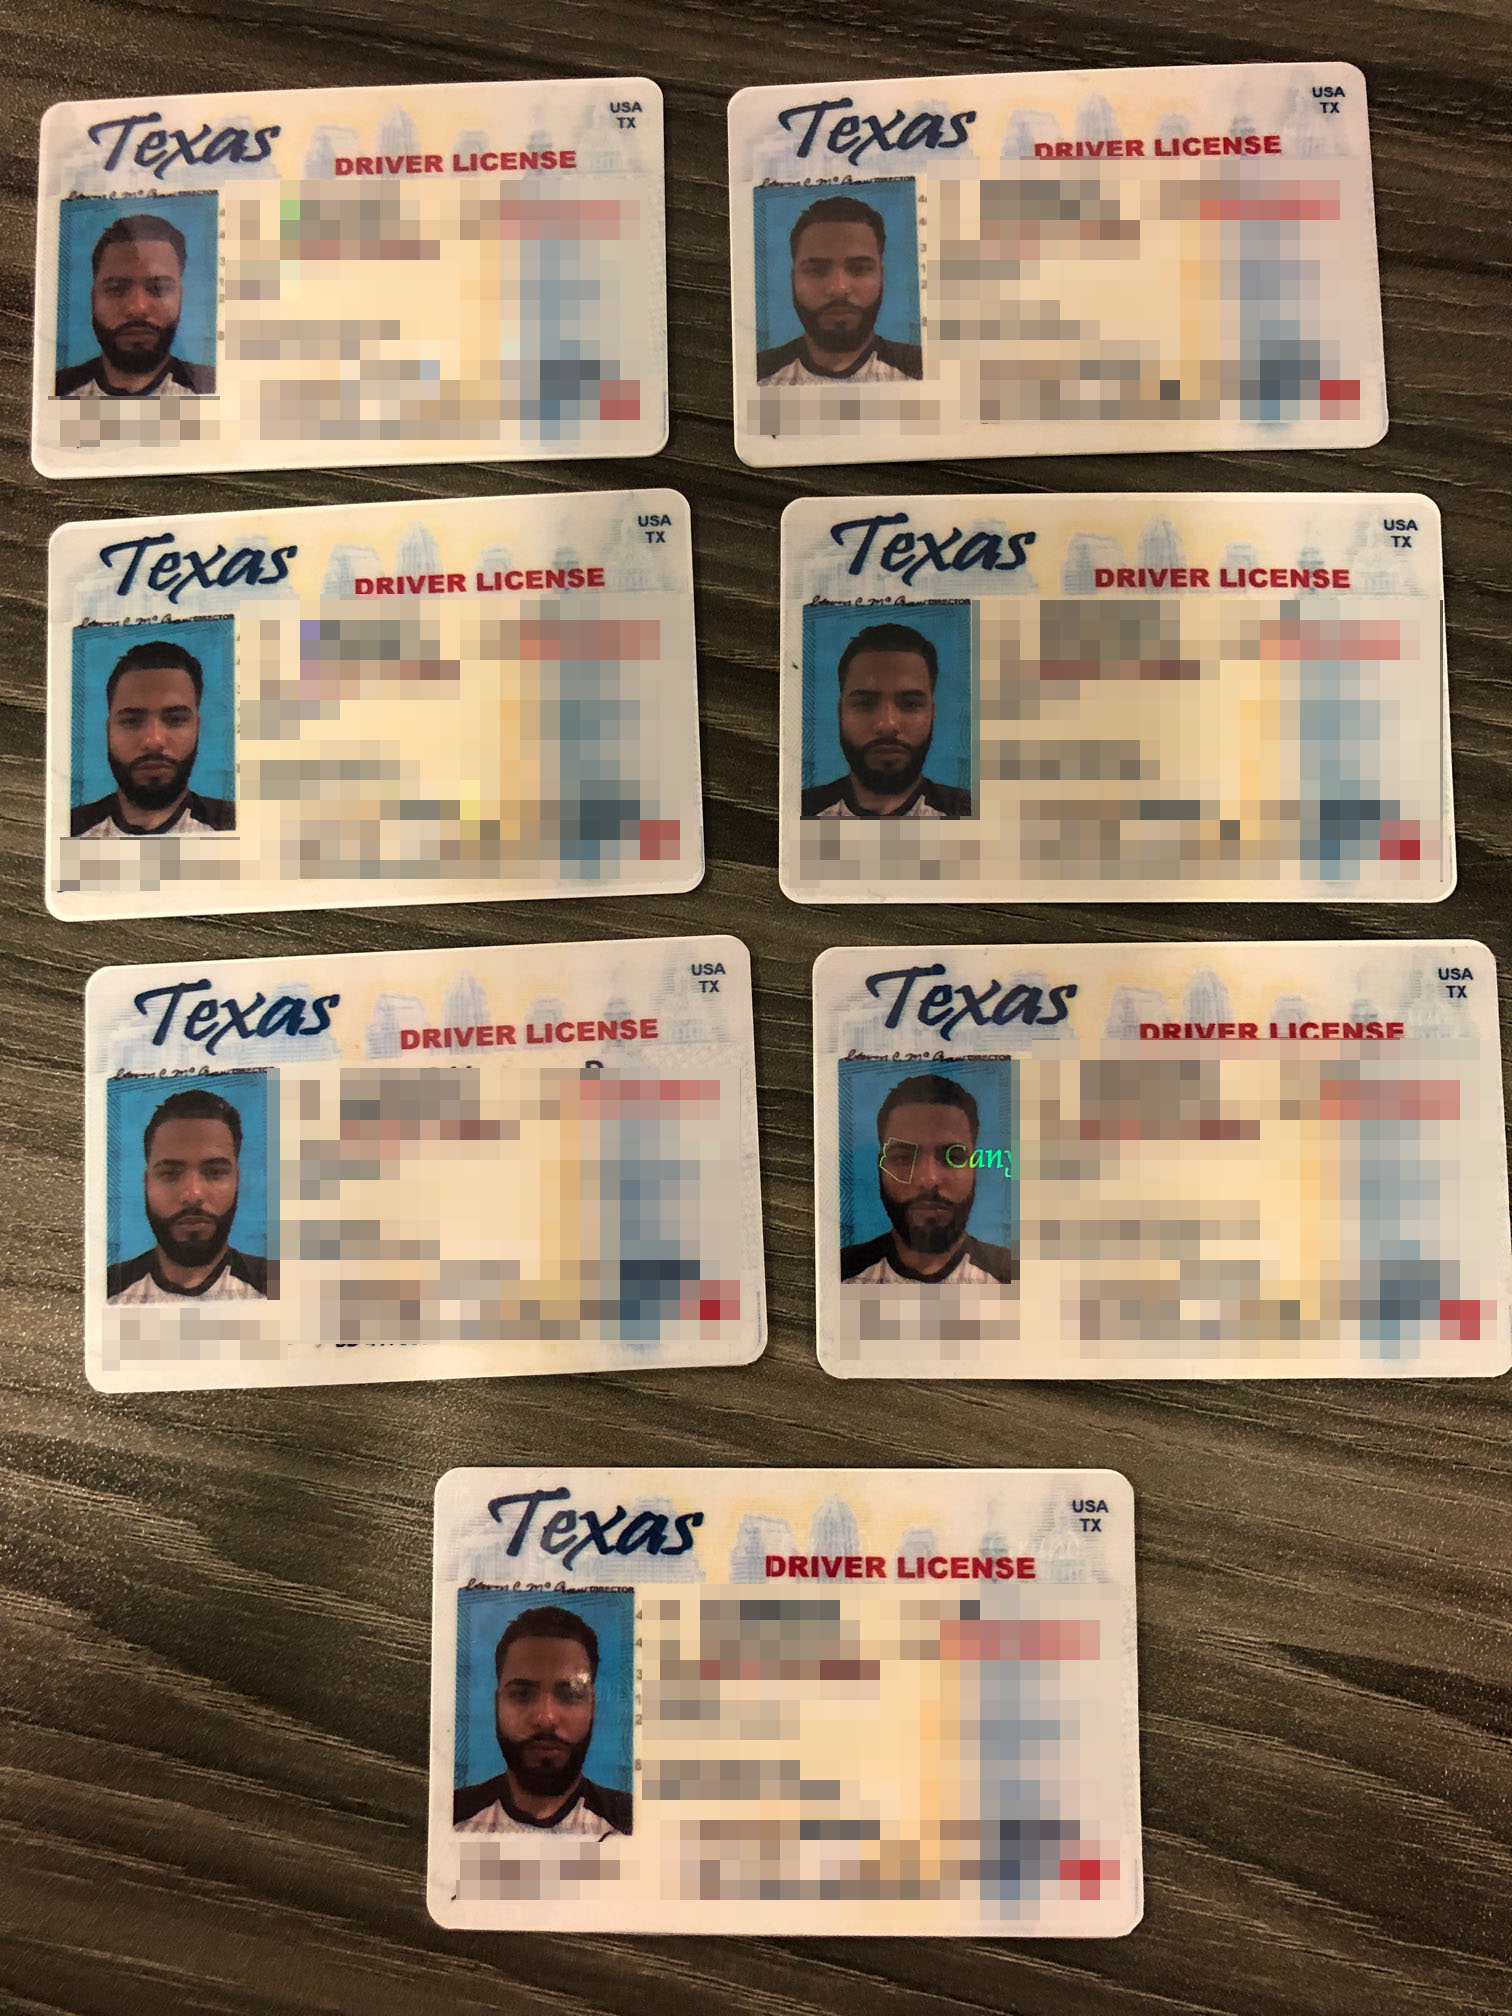 Photograph showing Polanco assuming and utilizing different aliases in the form of fraudulent driver’s licenses from Texas